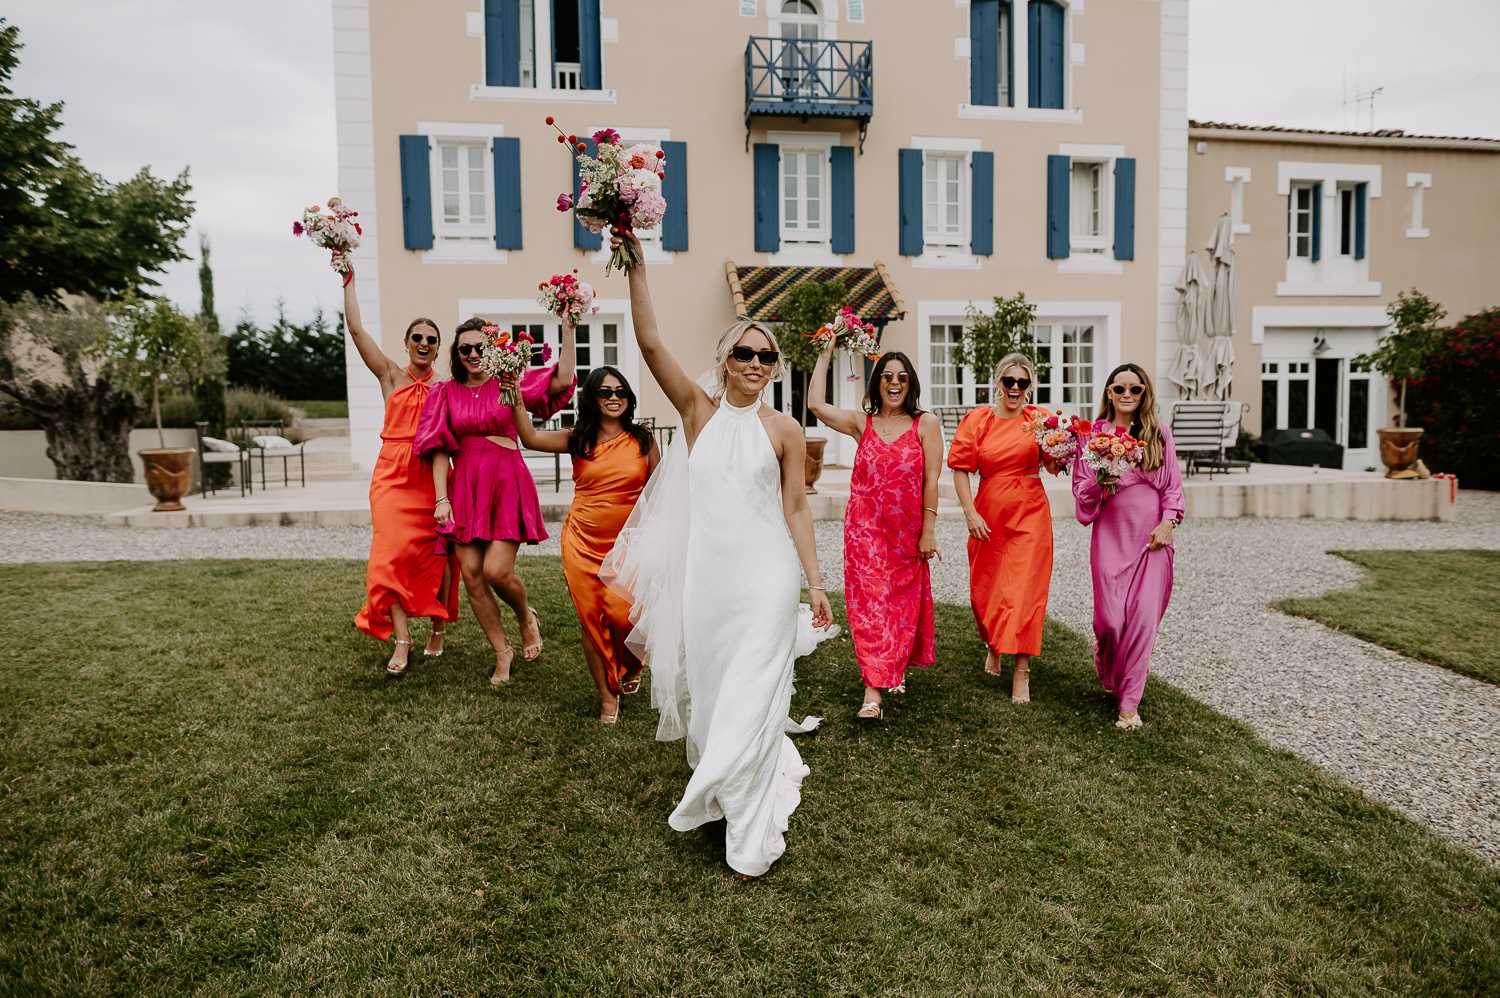 A bride and her bridesmaids throw the bouquets in the air as they walk in a line. The bouquets are all different shades of pinks and oranges and her bridesmaids wore pink and orange dresses that were all different styles and had their own pink bouquets.